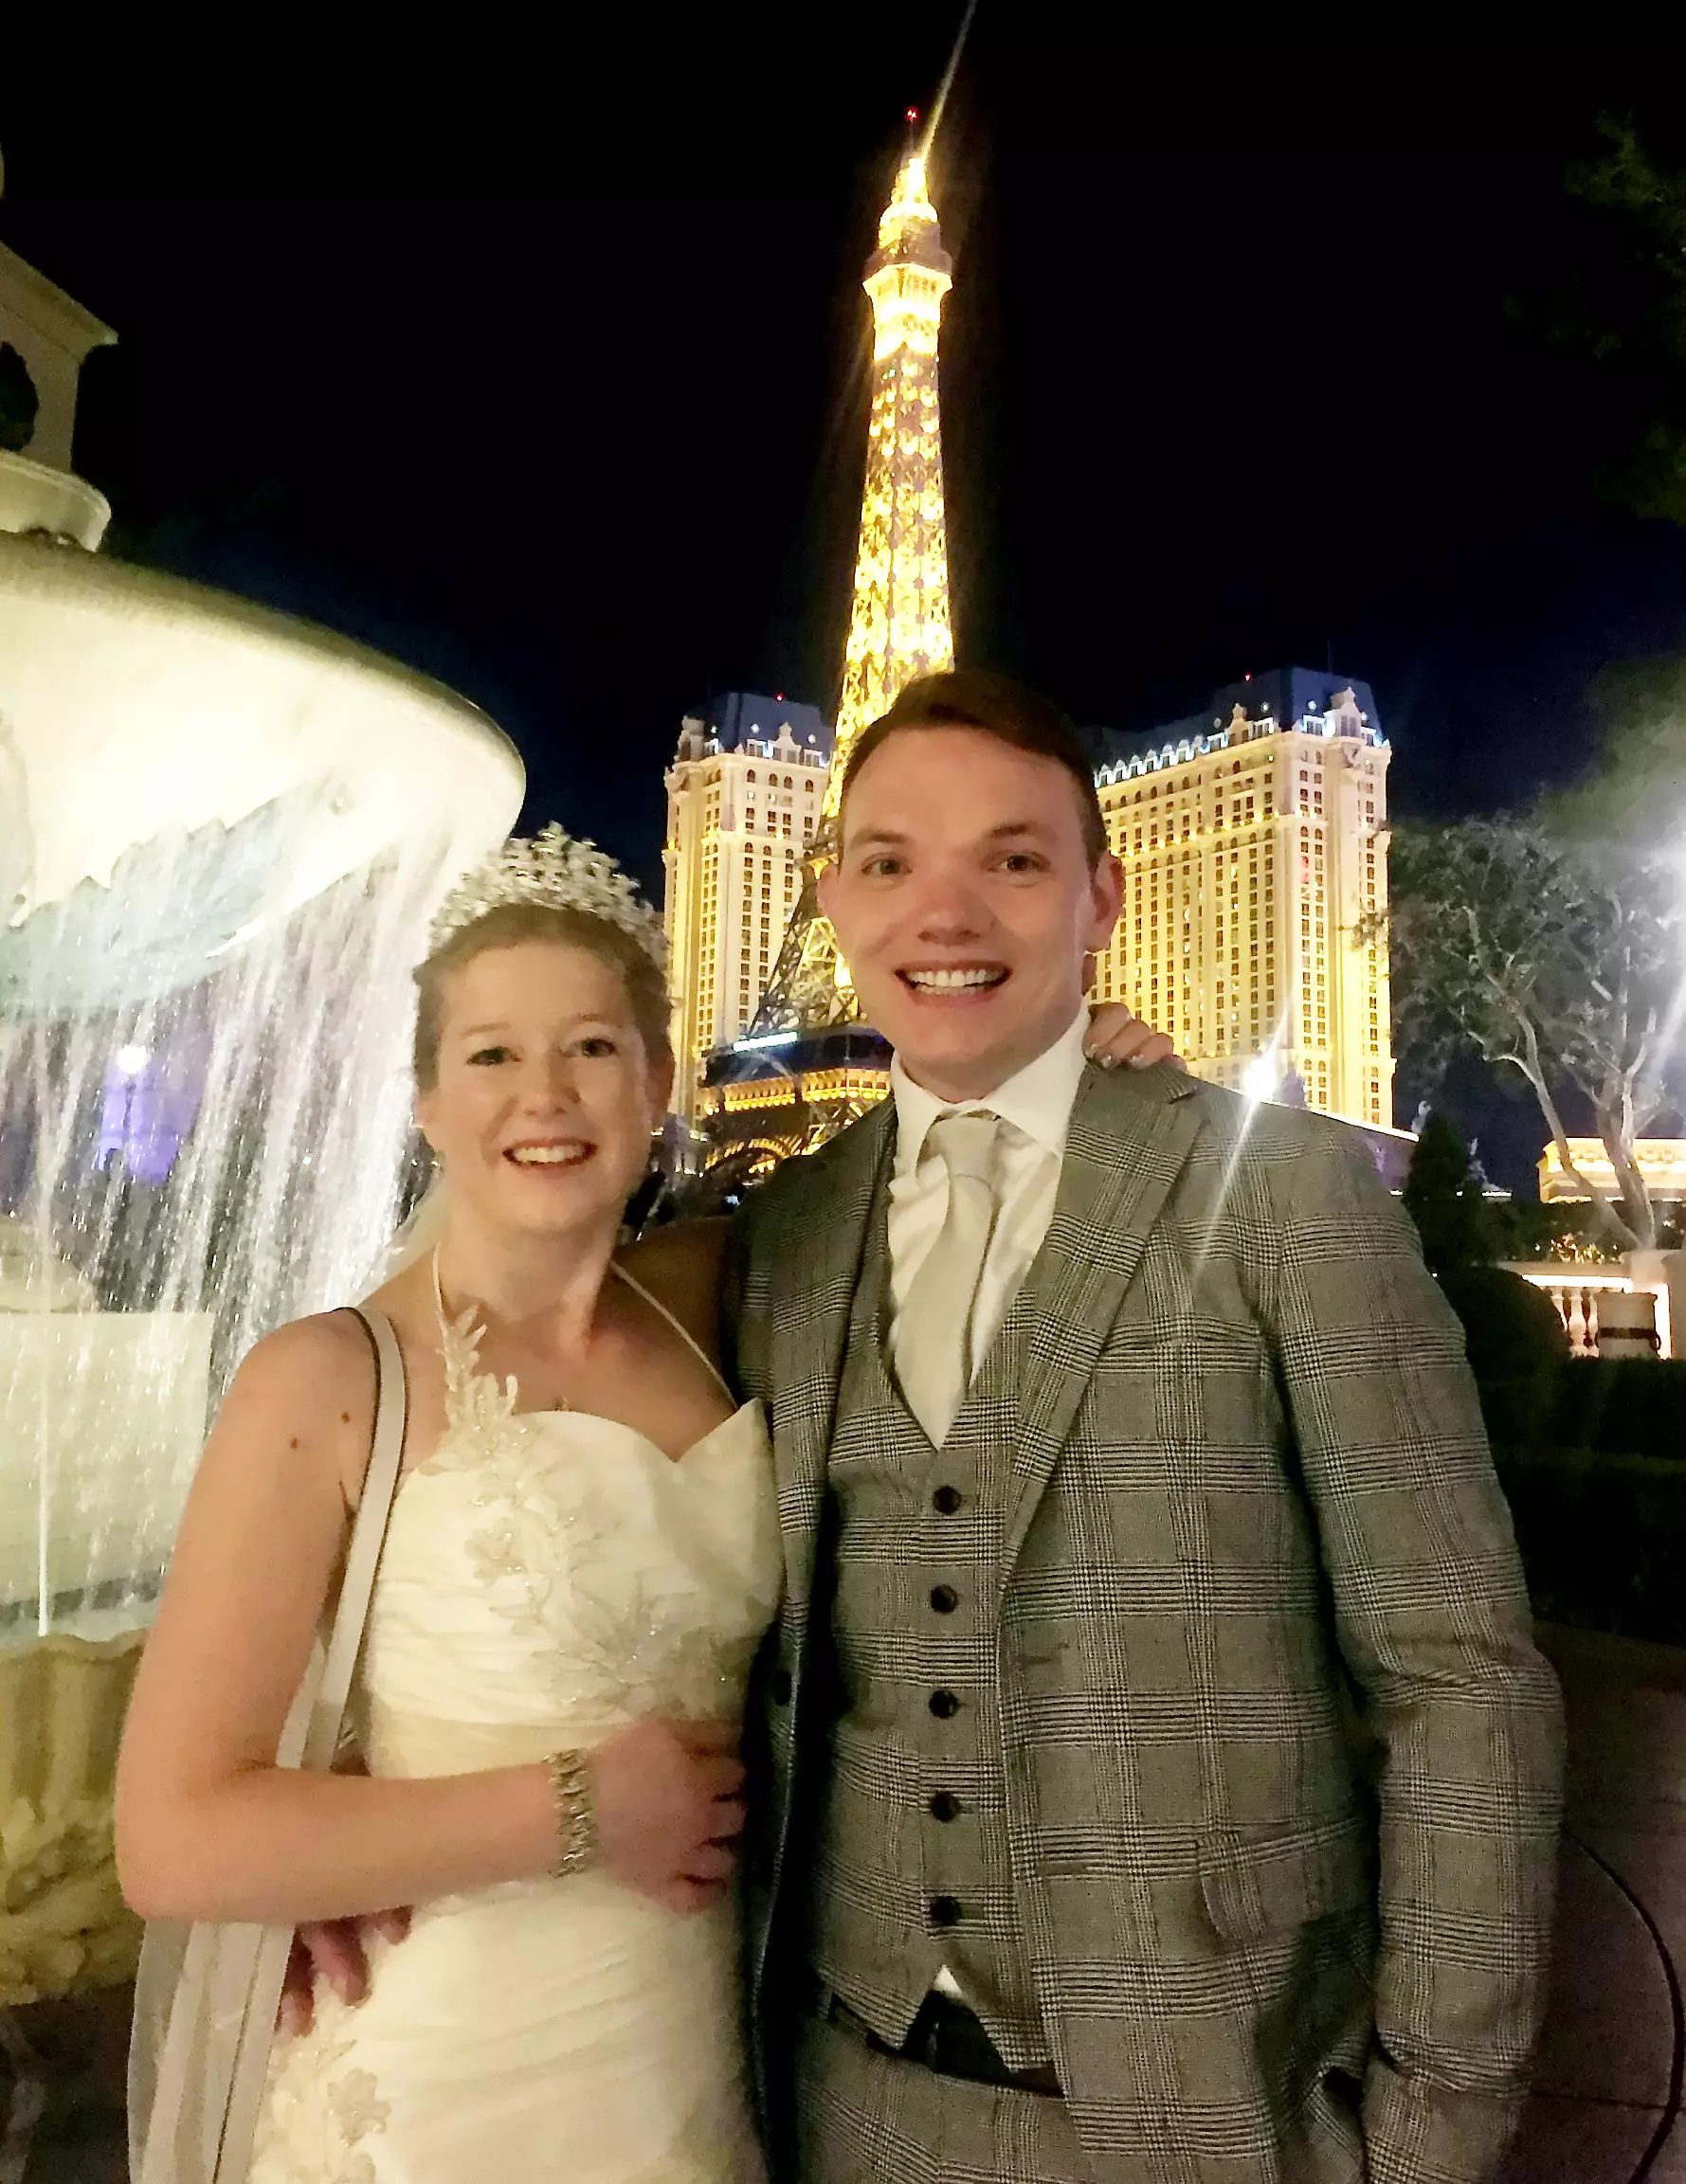 The couple got married in Las Vegas just before Christmas.